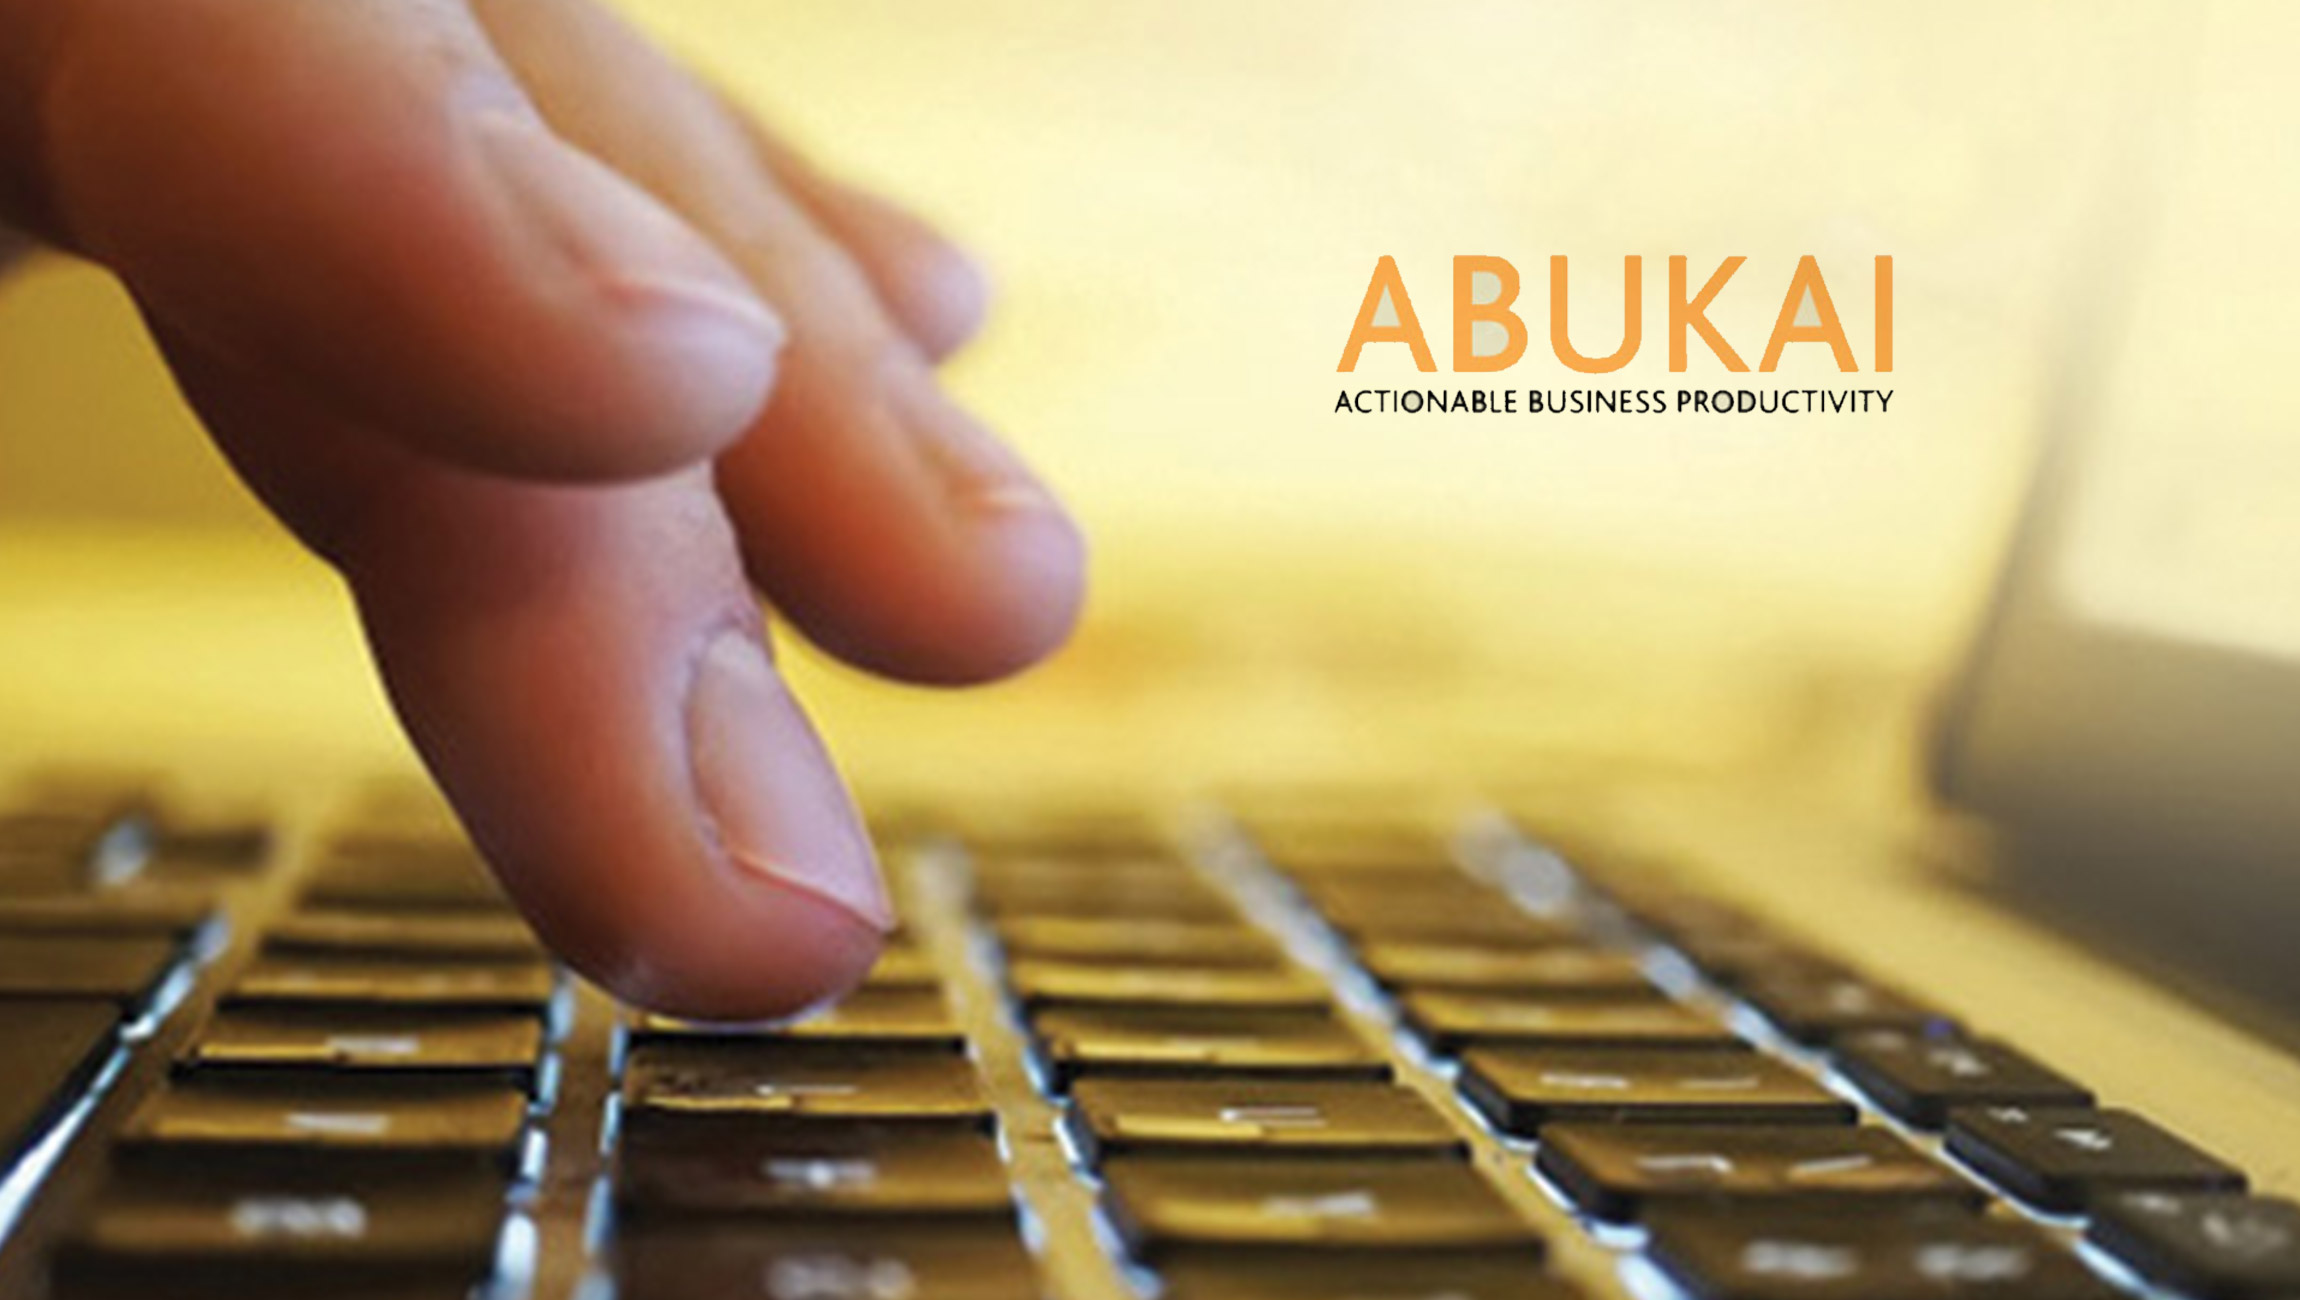 ABUKAI Email-Based Approvals Allows Convenient Approval of Expense Reports Directly from Email.